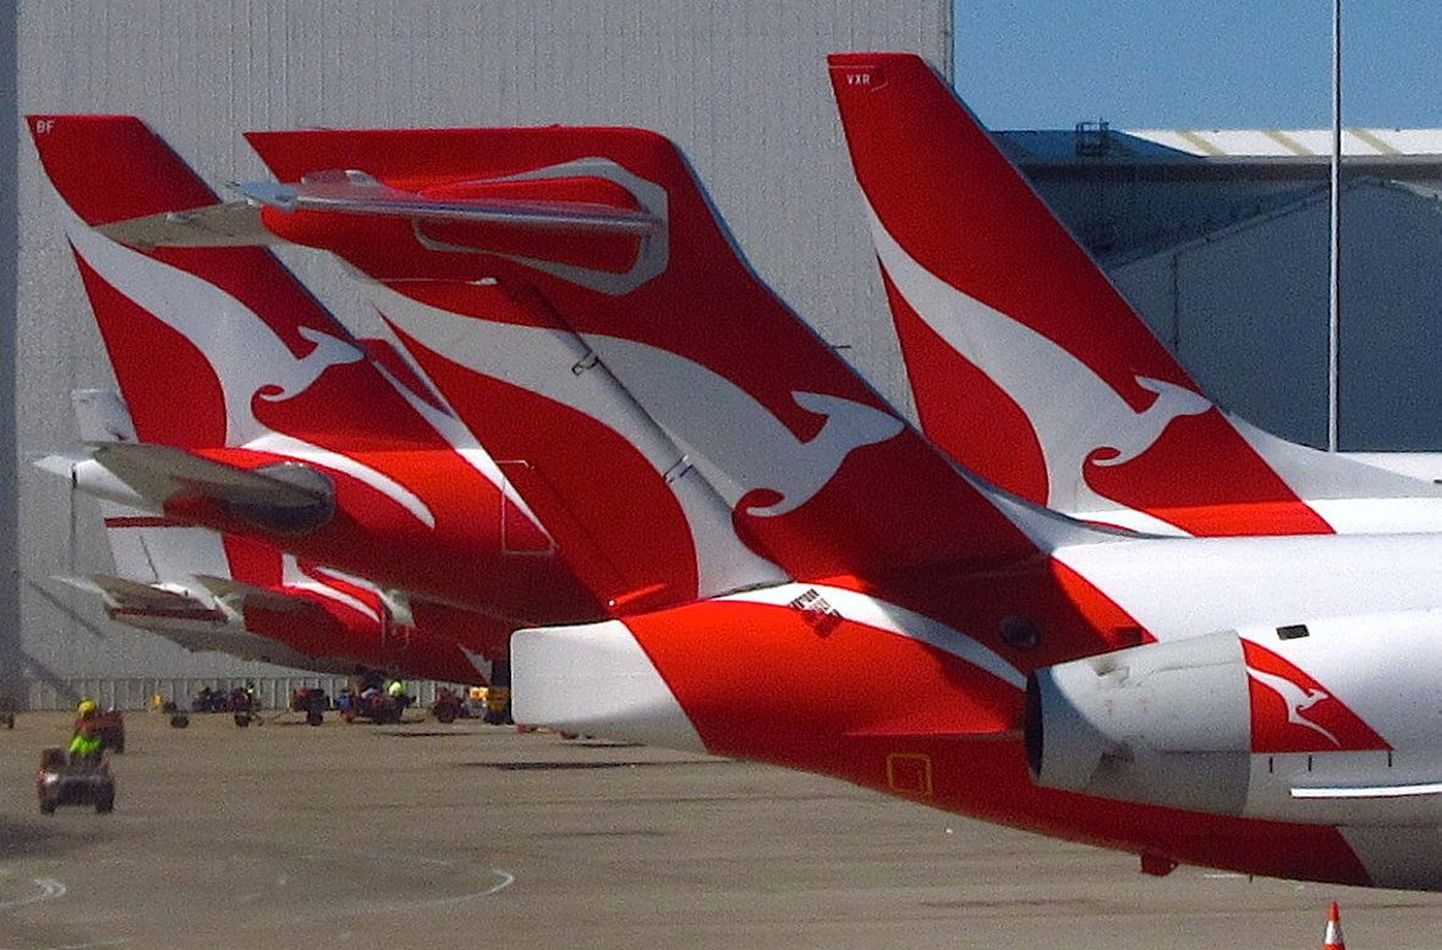 Australia's largest airline Qantas has grounded almost all international flights at least until October.